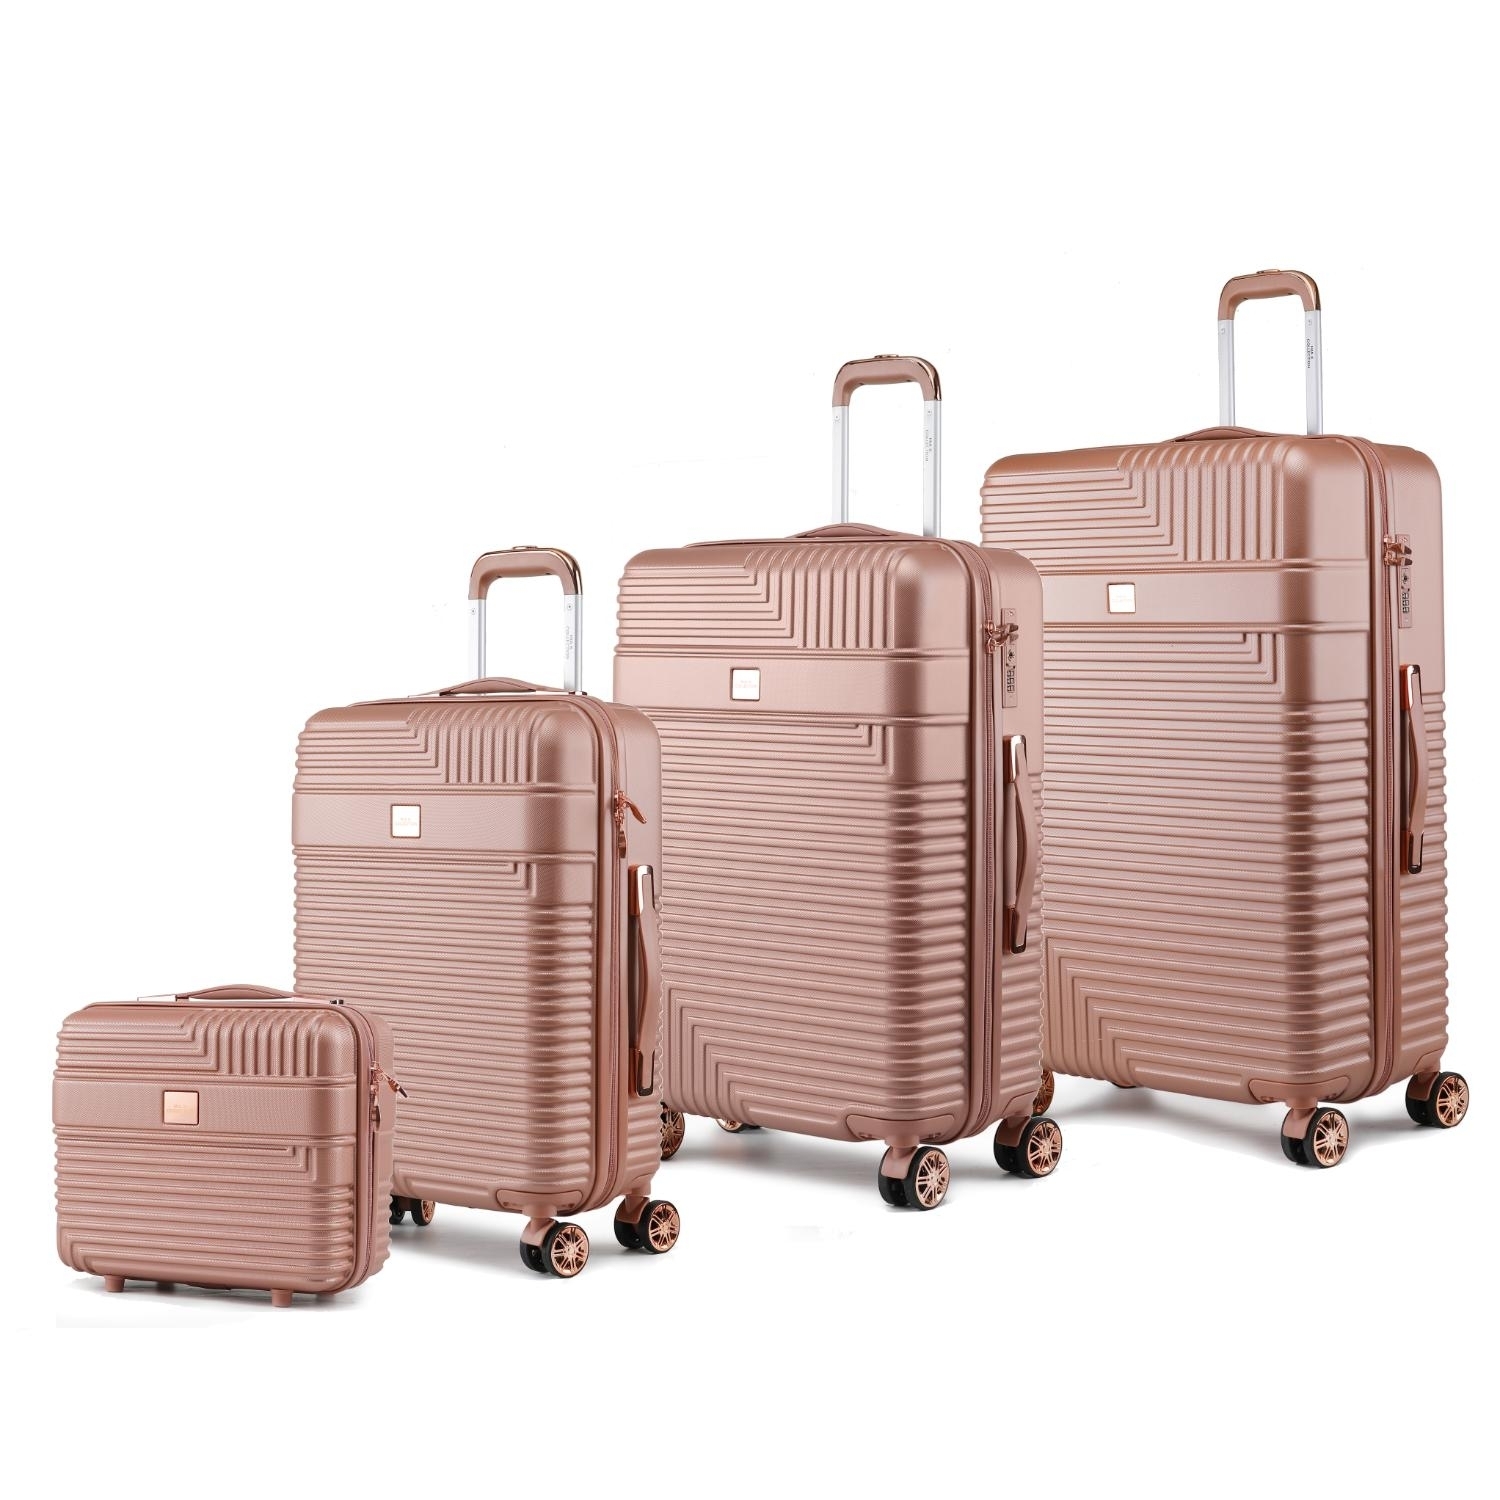 MKF Collection Mykonos Luggage Set- Extra Large Check-in, Large Check-in, Medium Carry-on, And Small Cosmetic Case 4 Pieces By Mia K - Rose